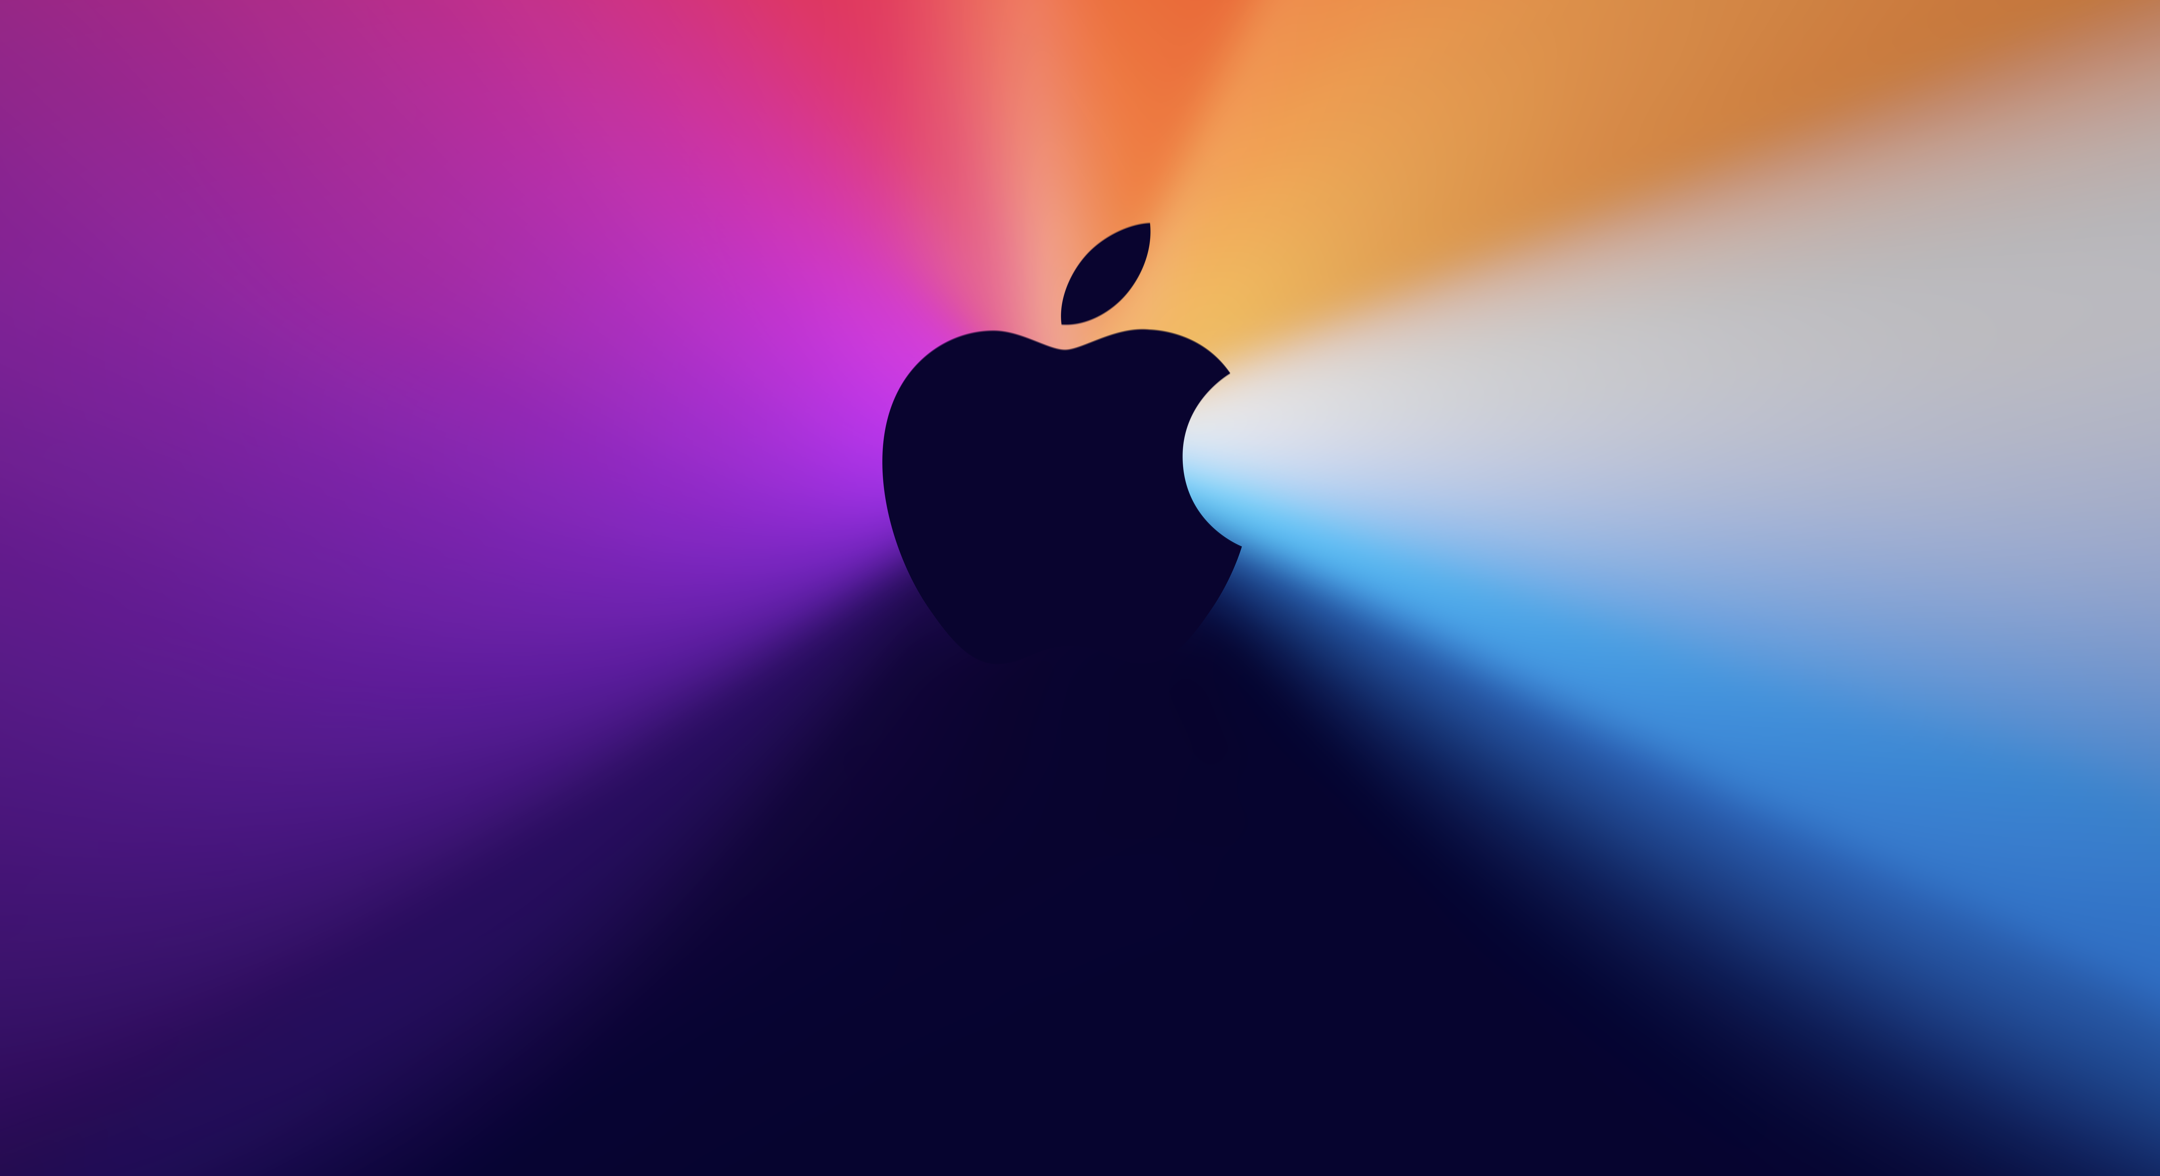 Apple Rumored to Have Product Announcement Tomorrow